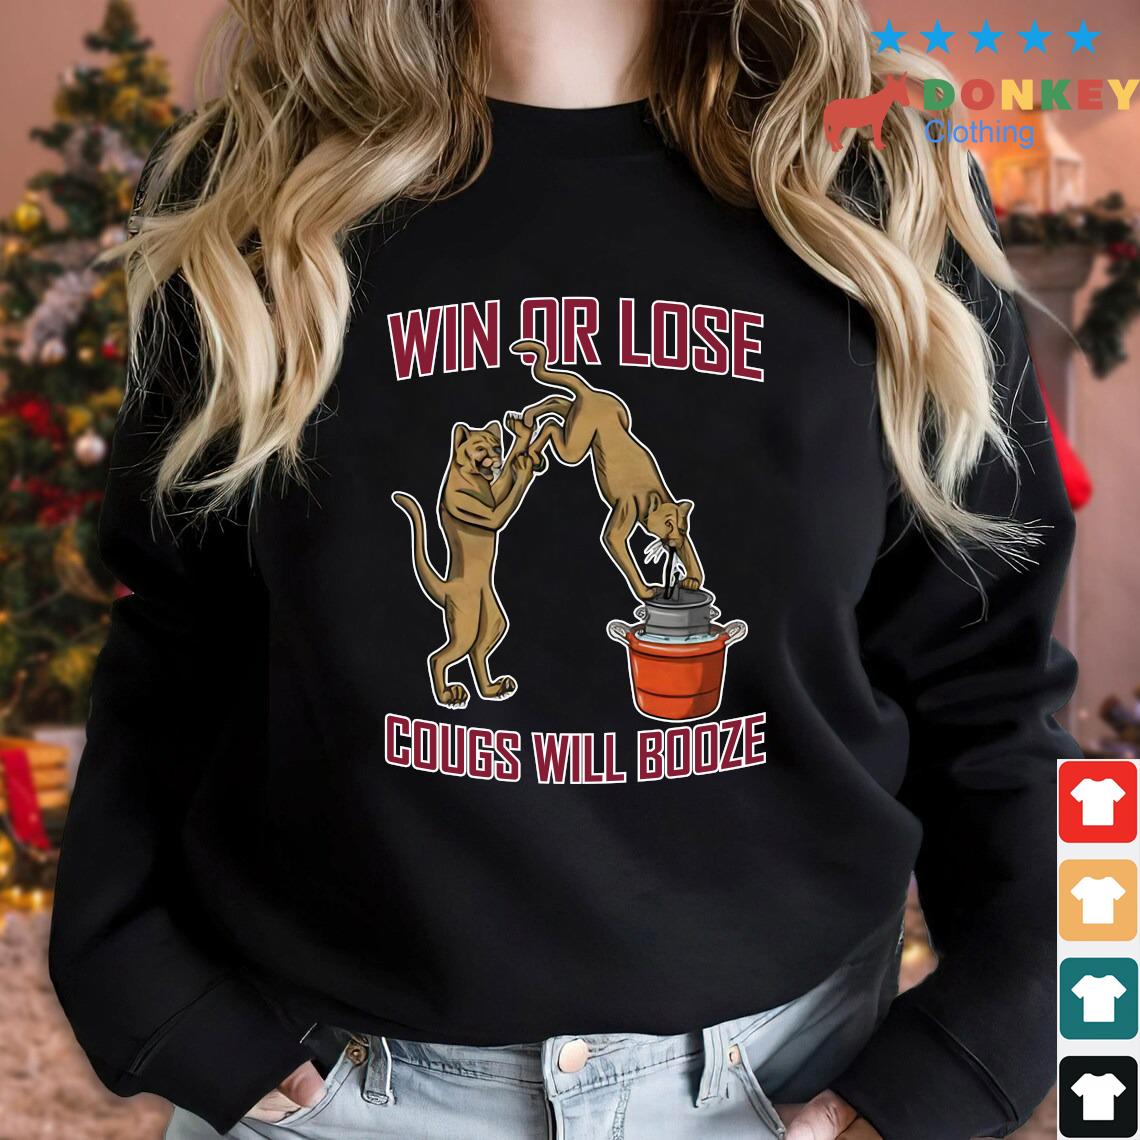 Win or lose cougs will booze 2022 t-shirt